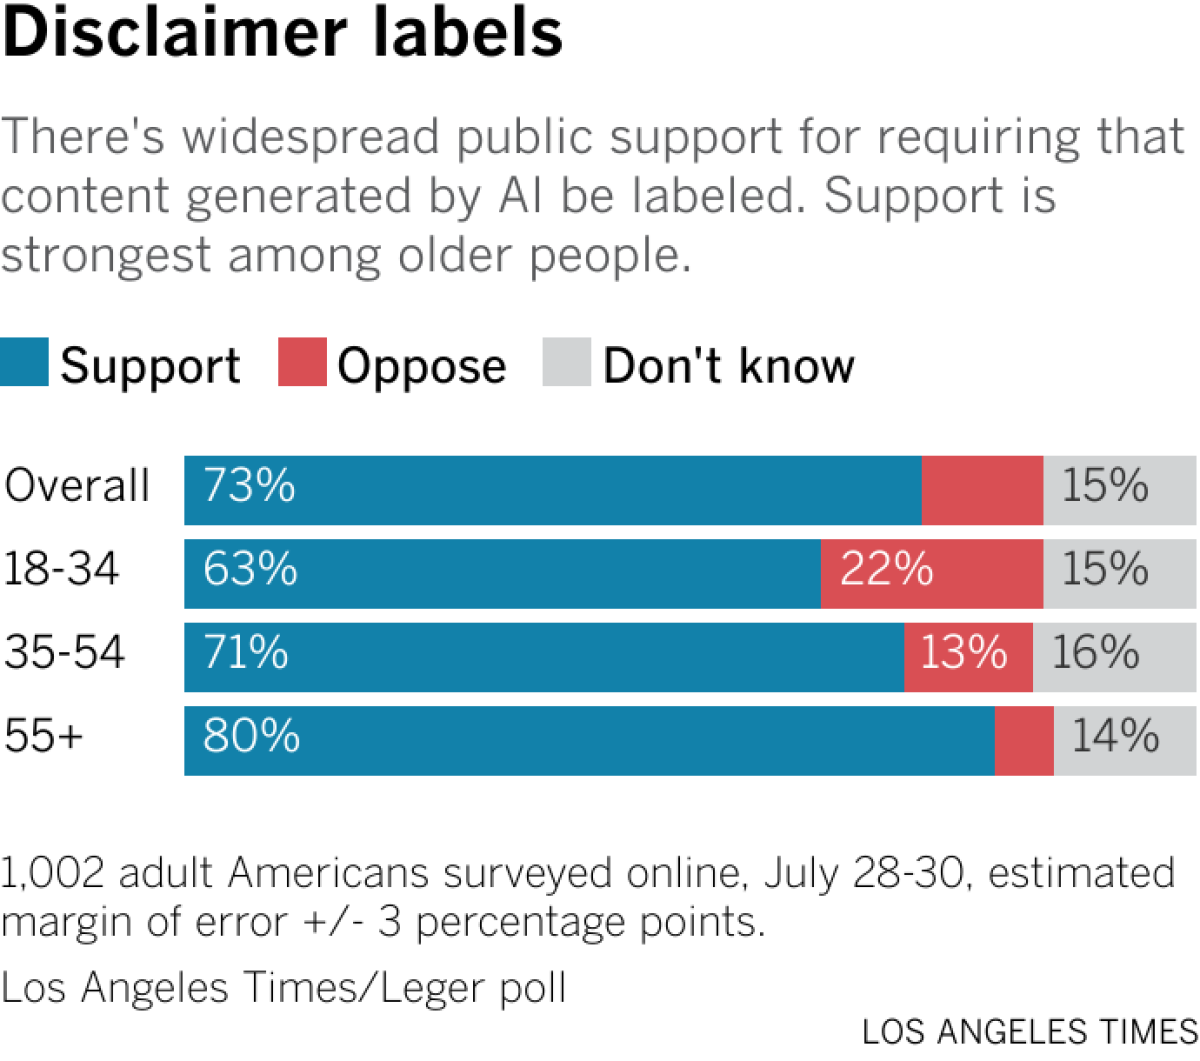 There's widespread public support for requiring that content generated by AI be labeled. Support is strongest among older people.